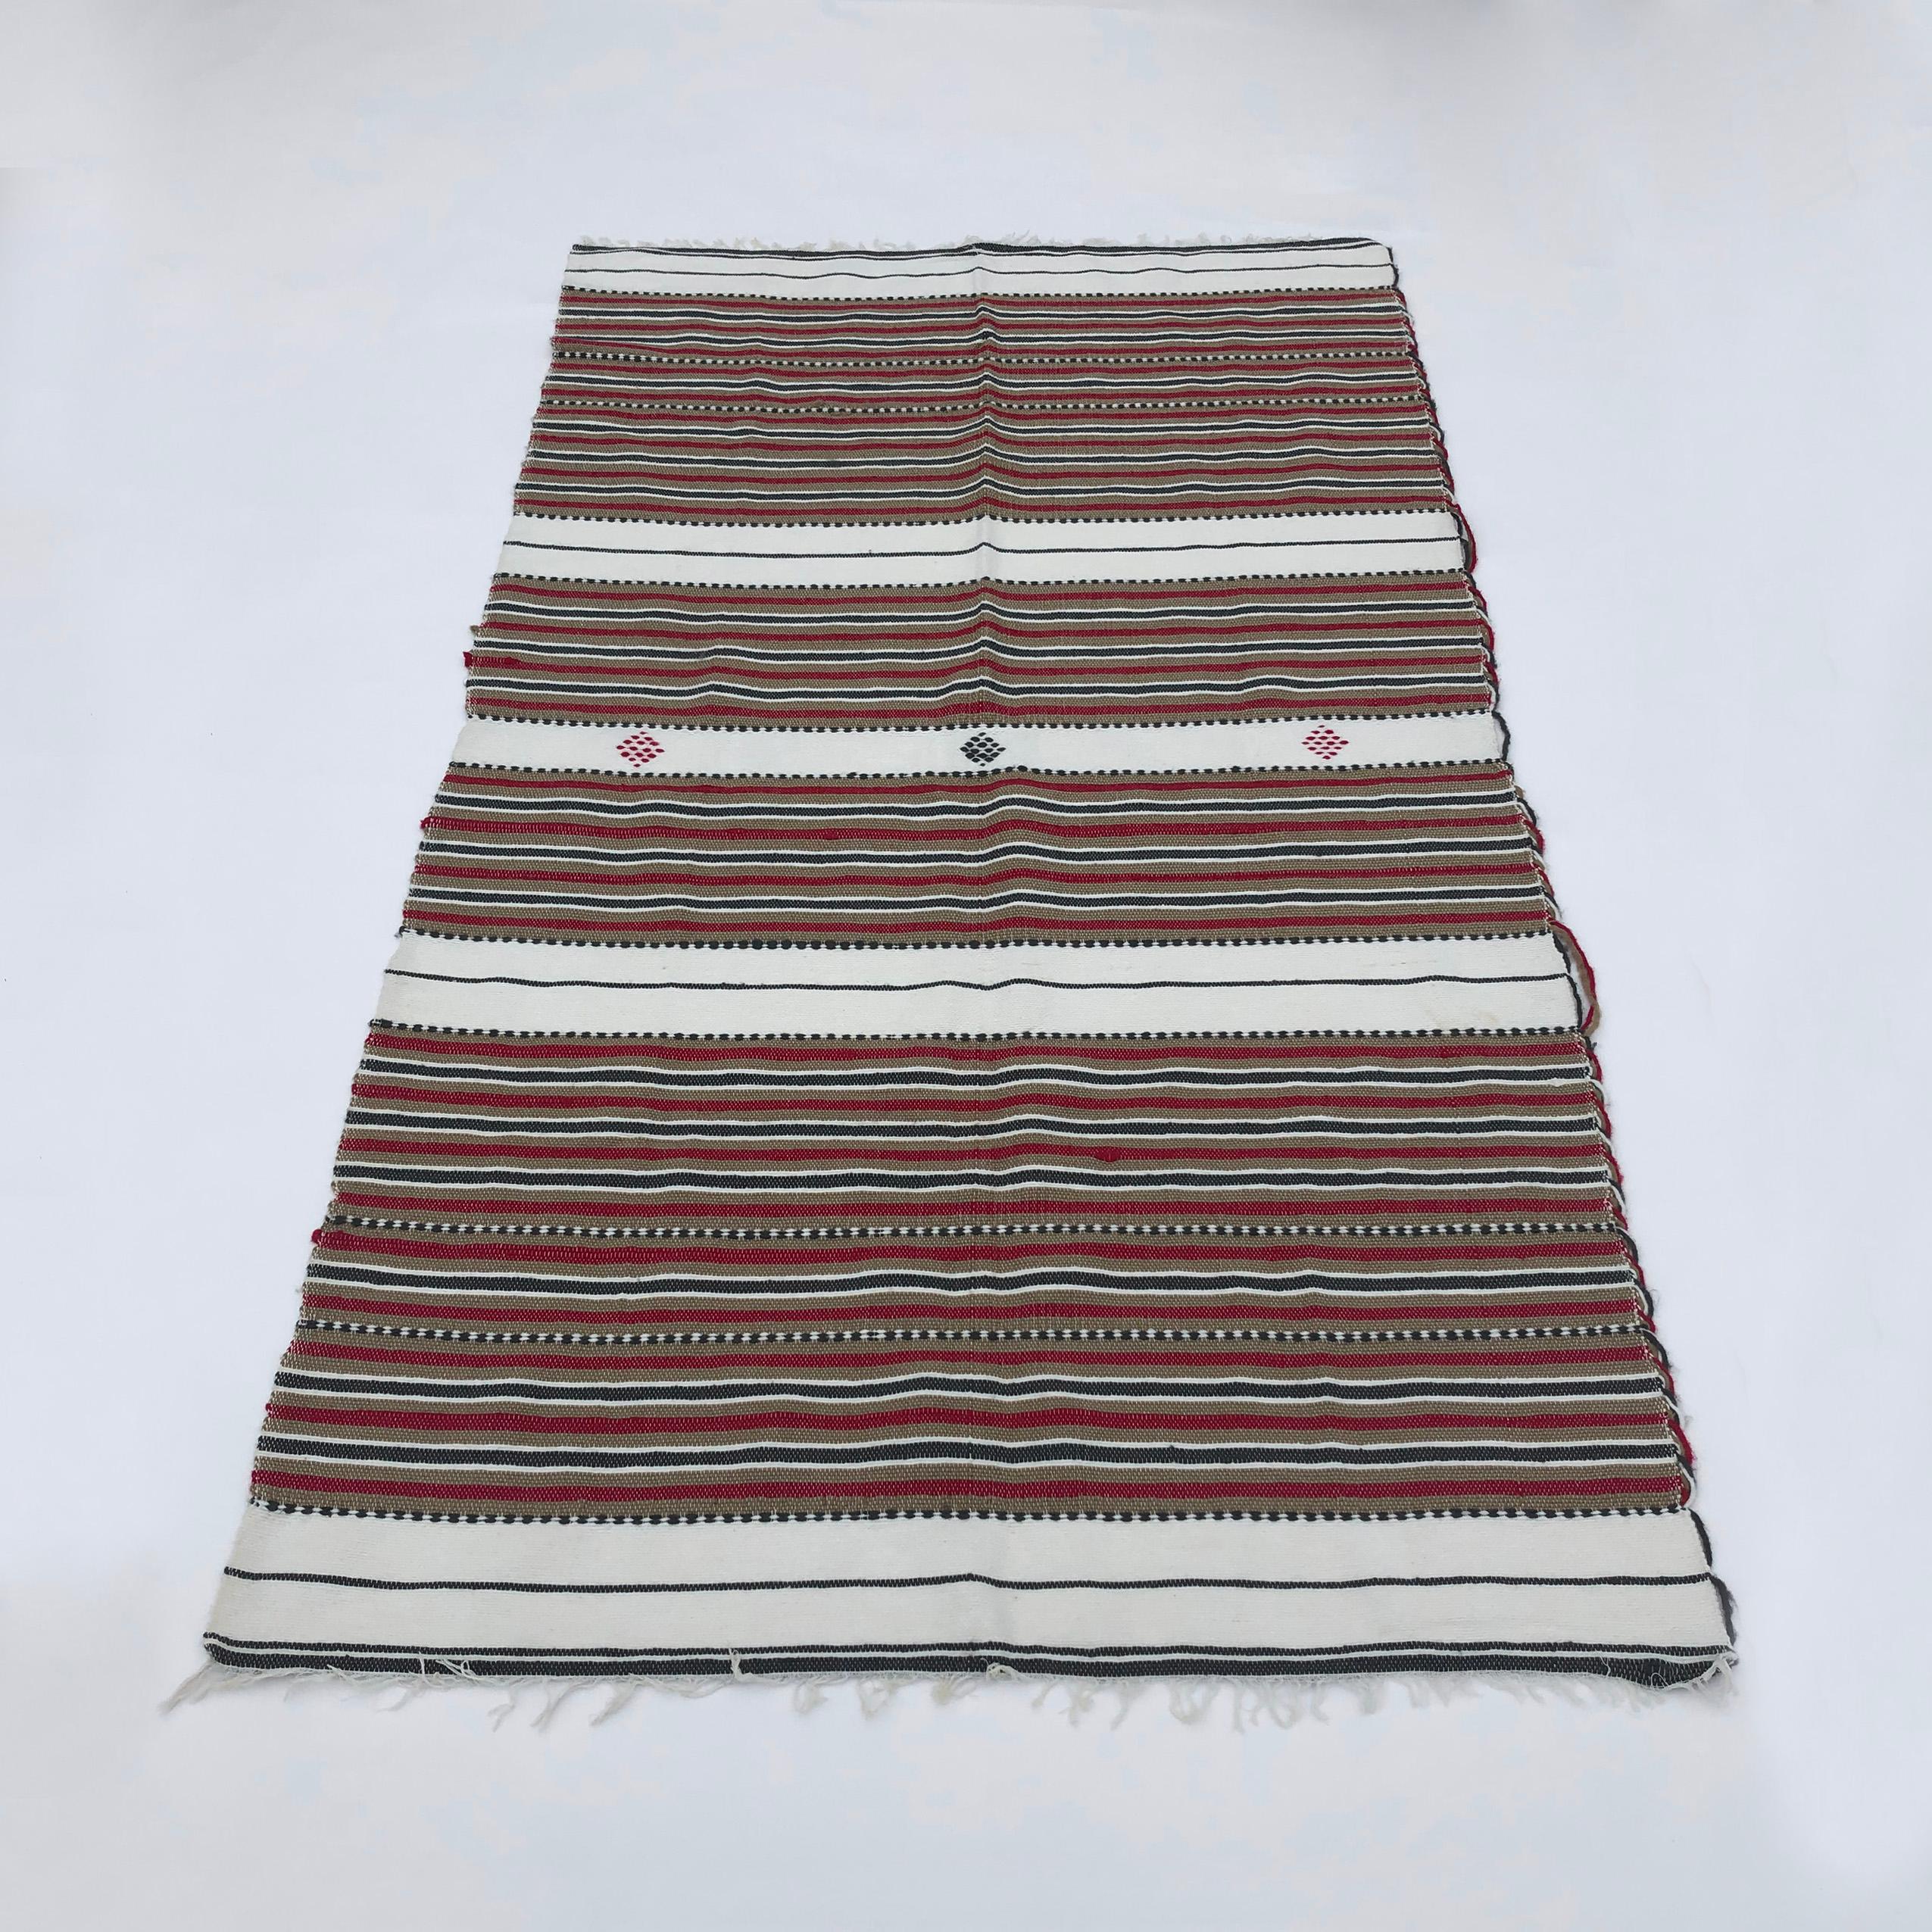 A vintage handmade wool rug from 1970s Algeria, in tricolour stripes of pleasing reds,  browns, and blacks. The wool yarns come from ethically grown livestock, and are hand dyed and treated by locals using traditional organic methods – hence the